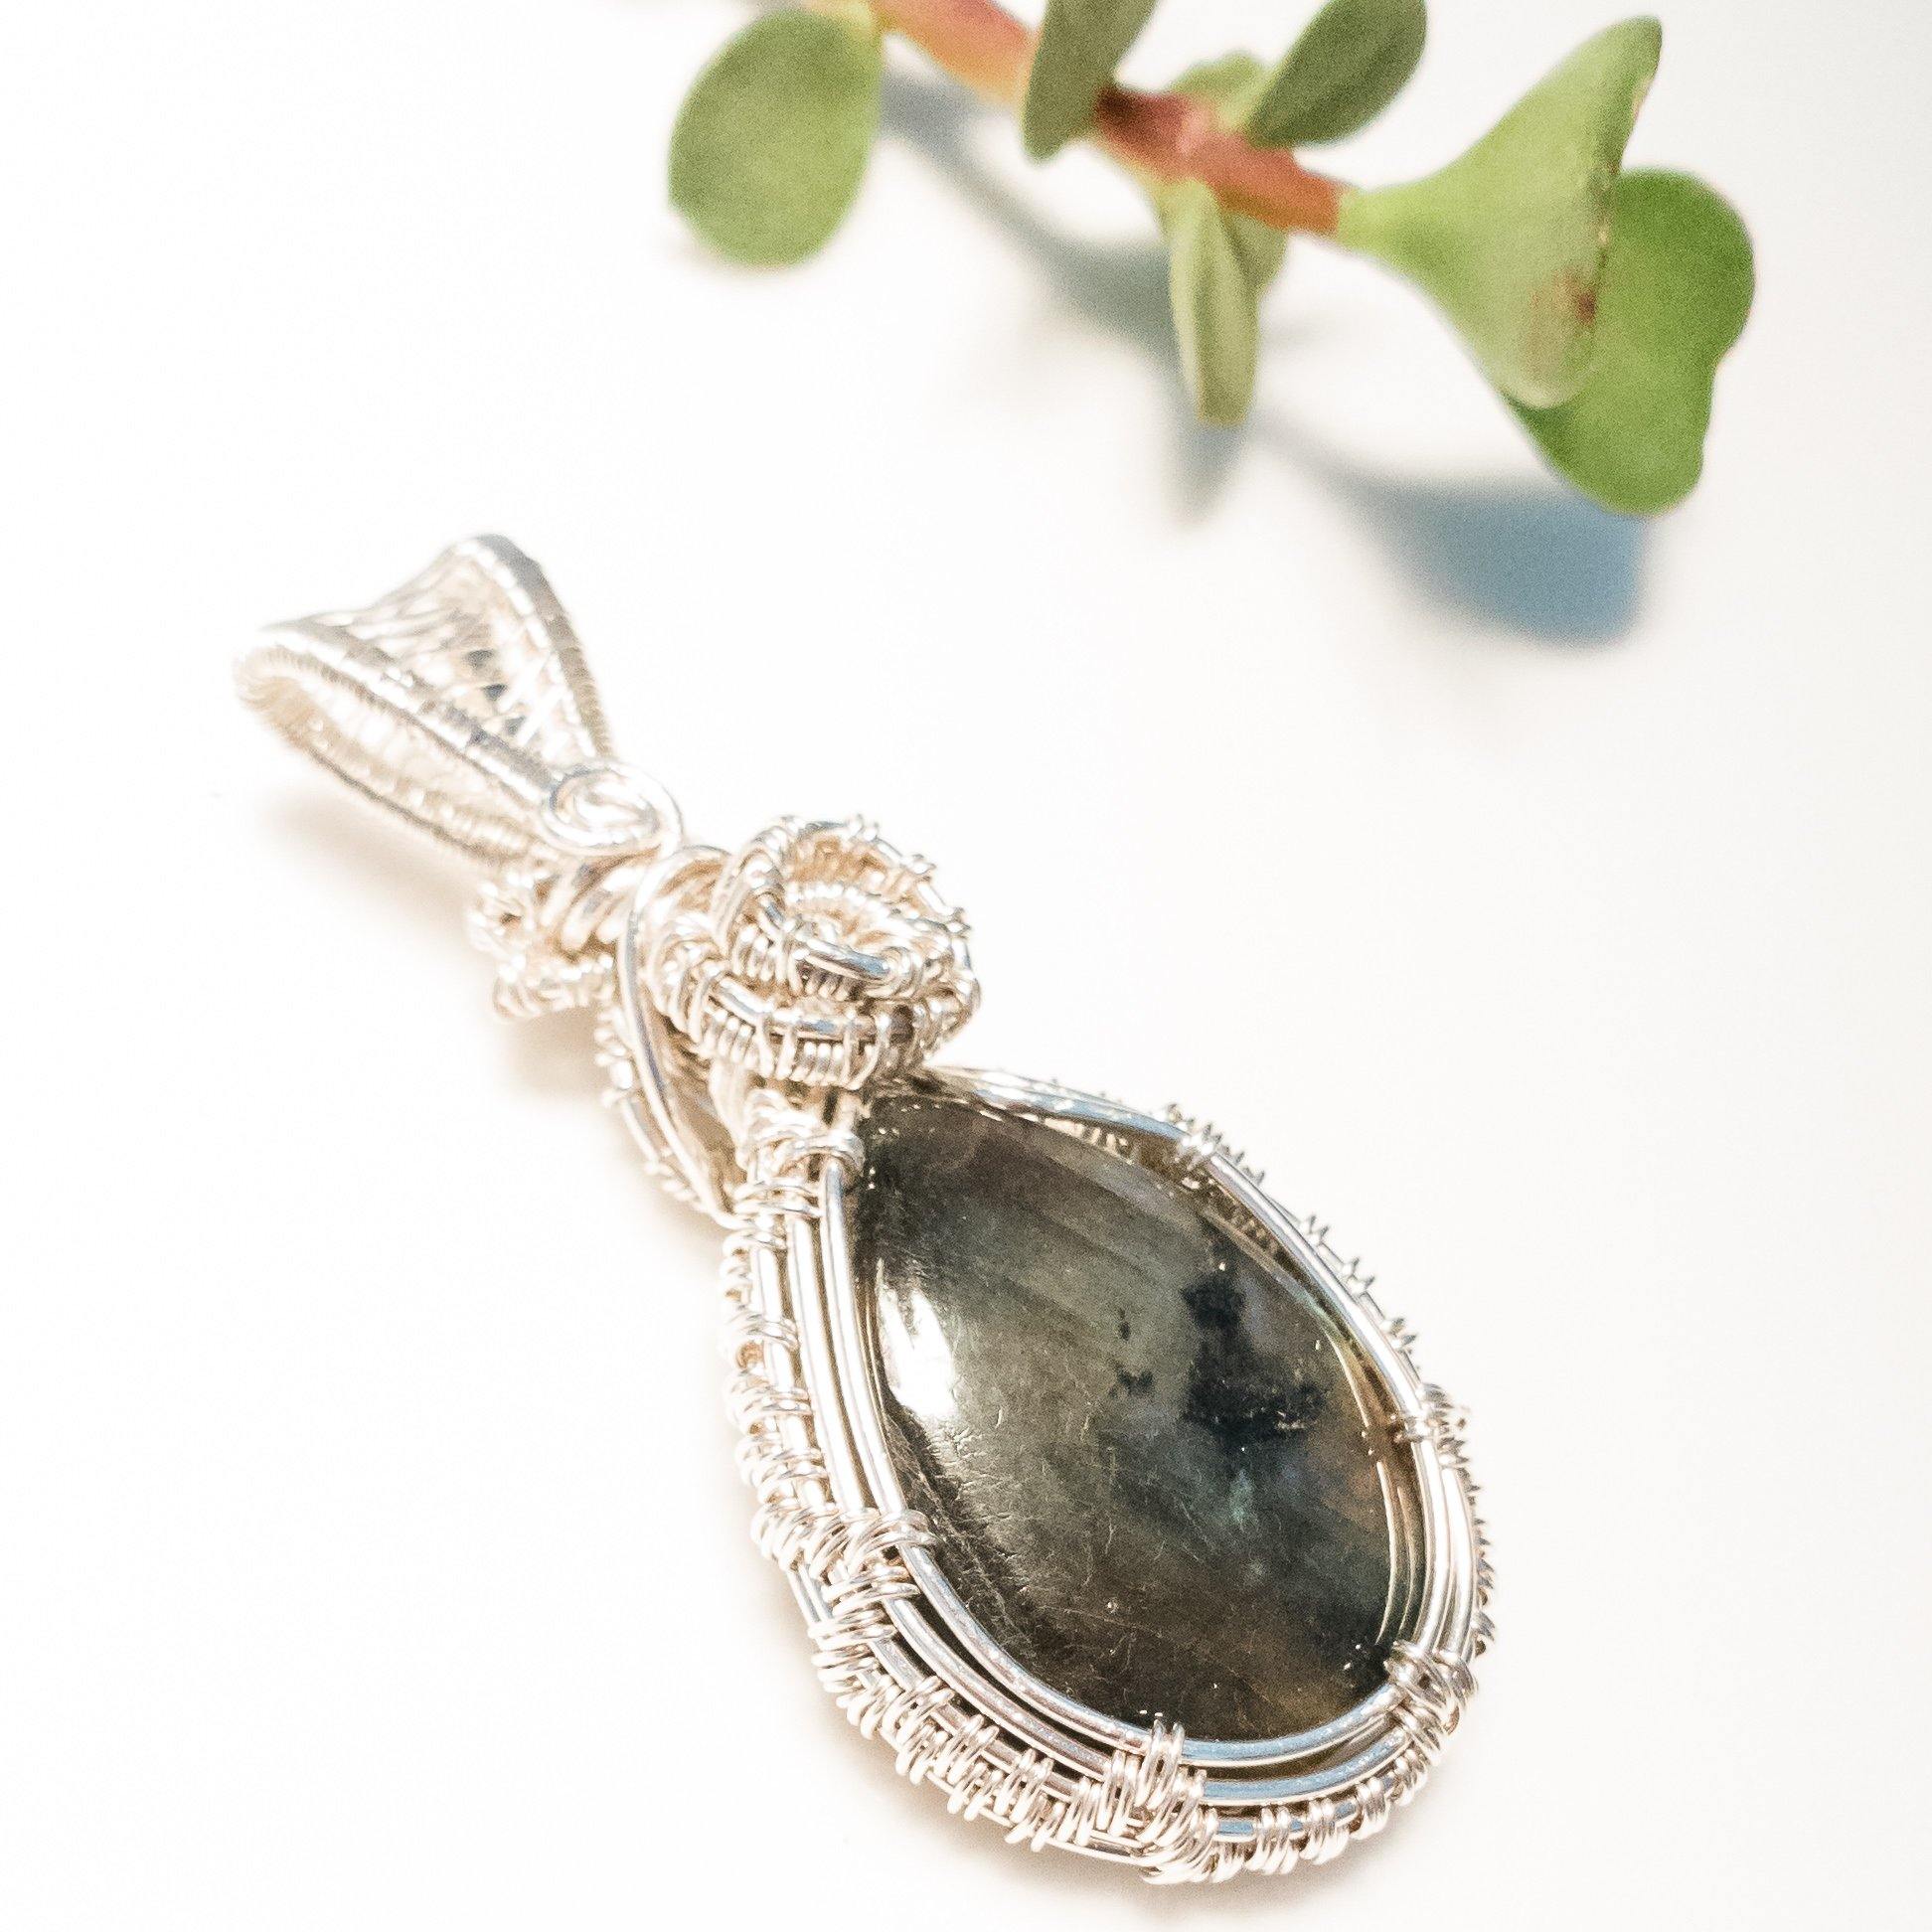 Aurora Collection - Real Labradorite weaved in Sterling Silver Pendant front side view - BellaChel Jeweler